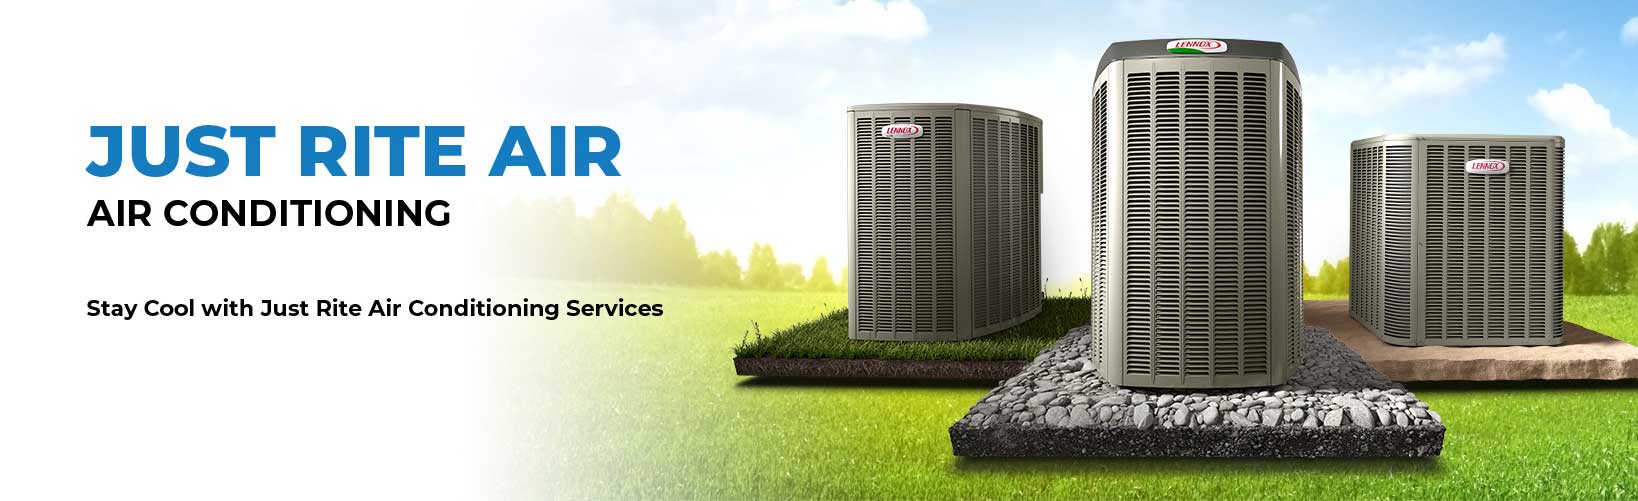 just rite air air conditioning services